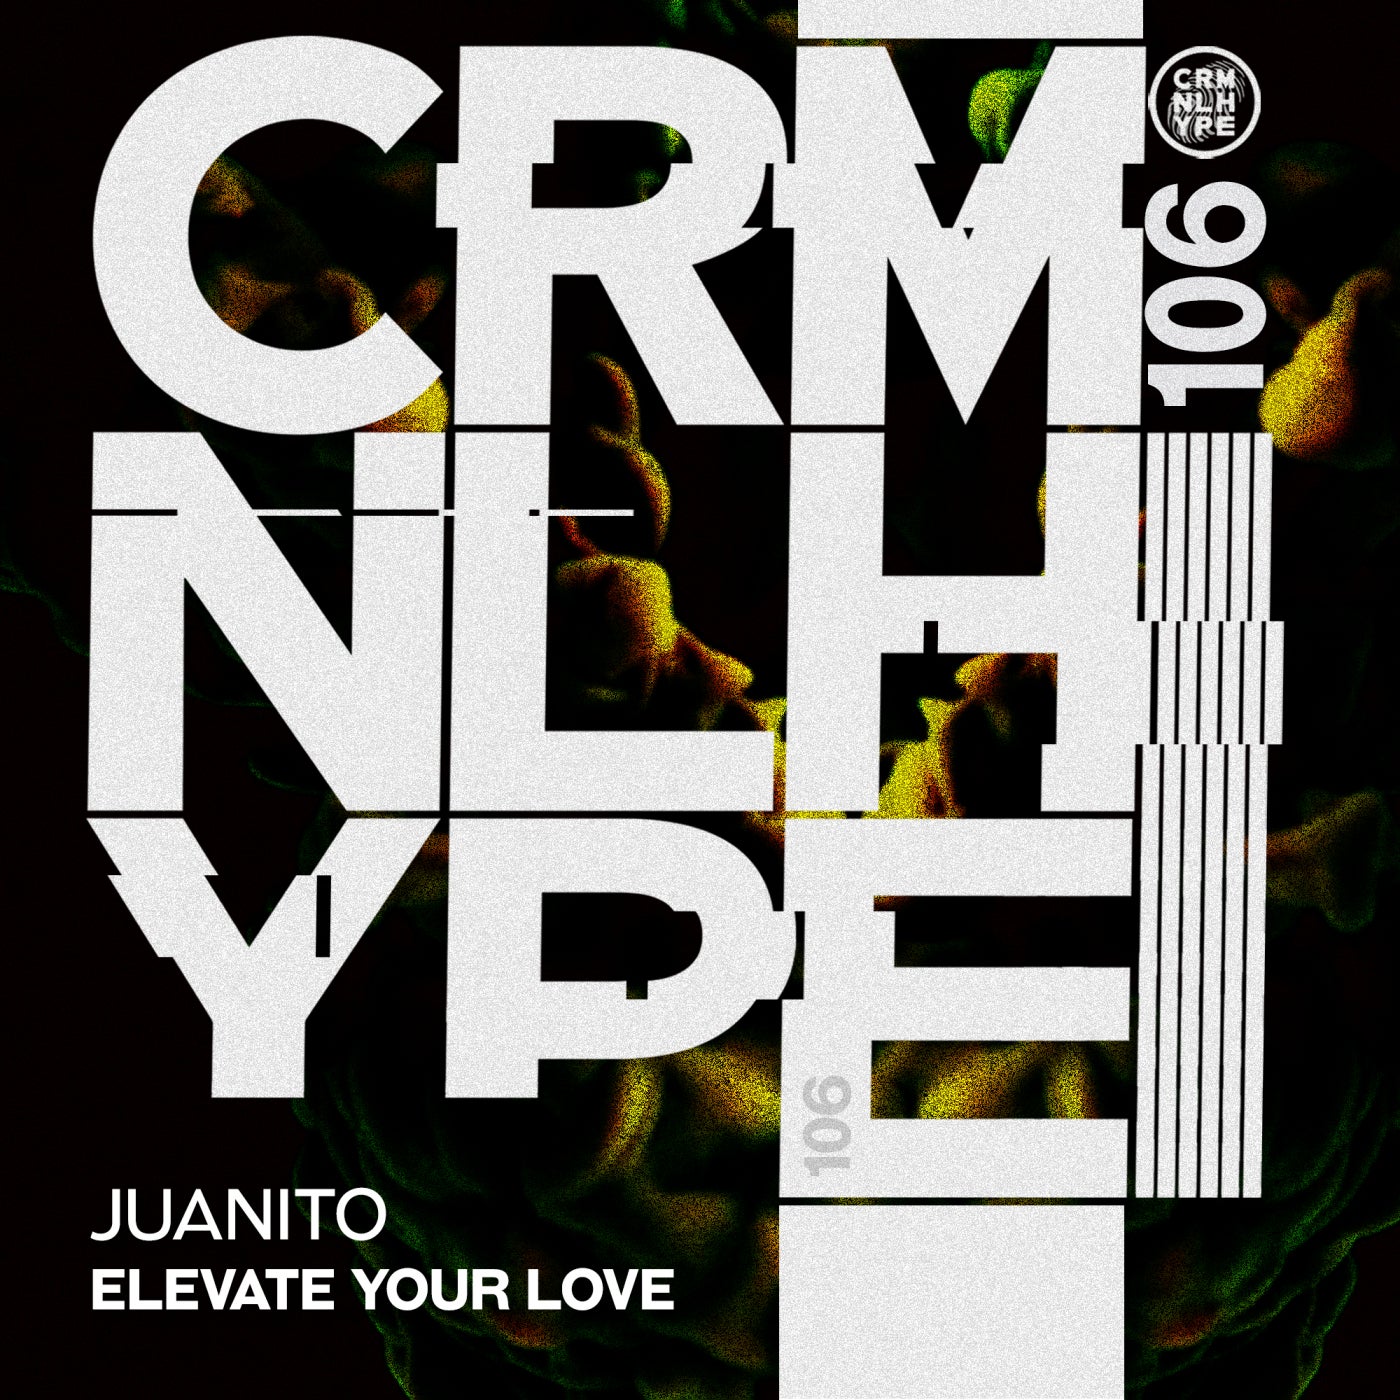 Juanito – Elevate Your Love [CHR106]